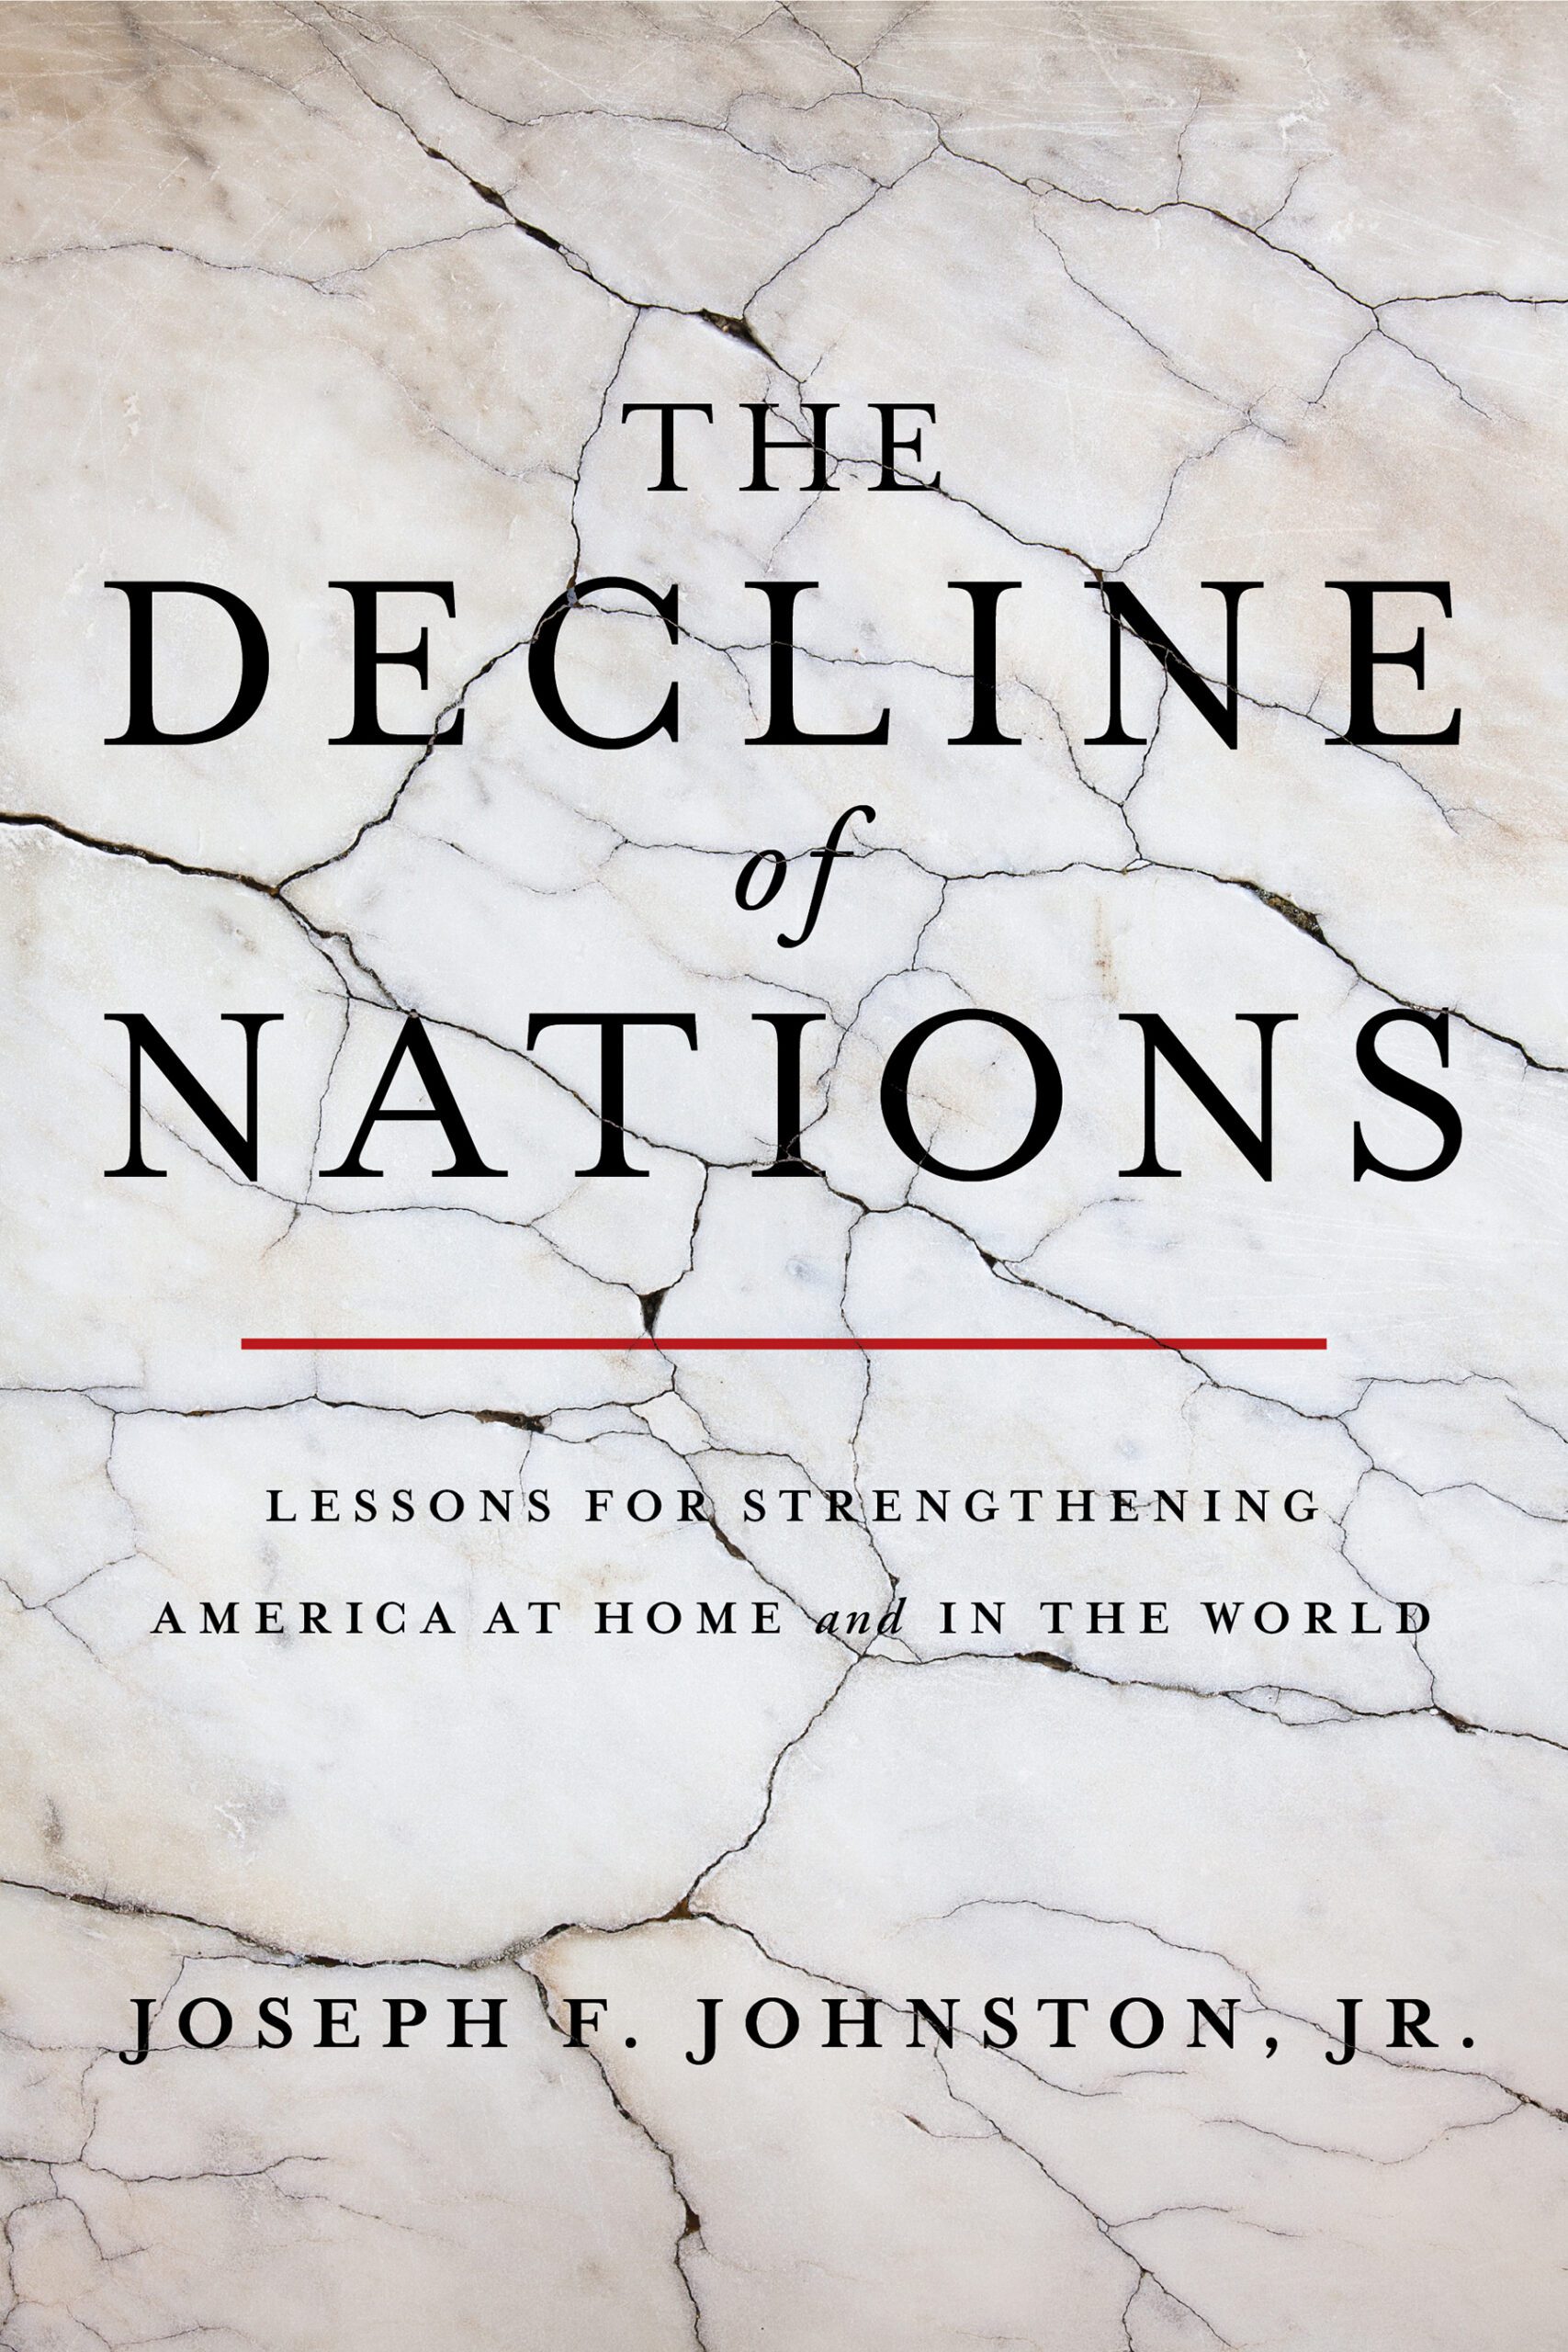 The Decline of Nations by Joseph F. Johnston, Jr.